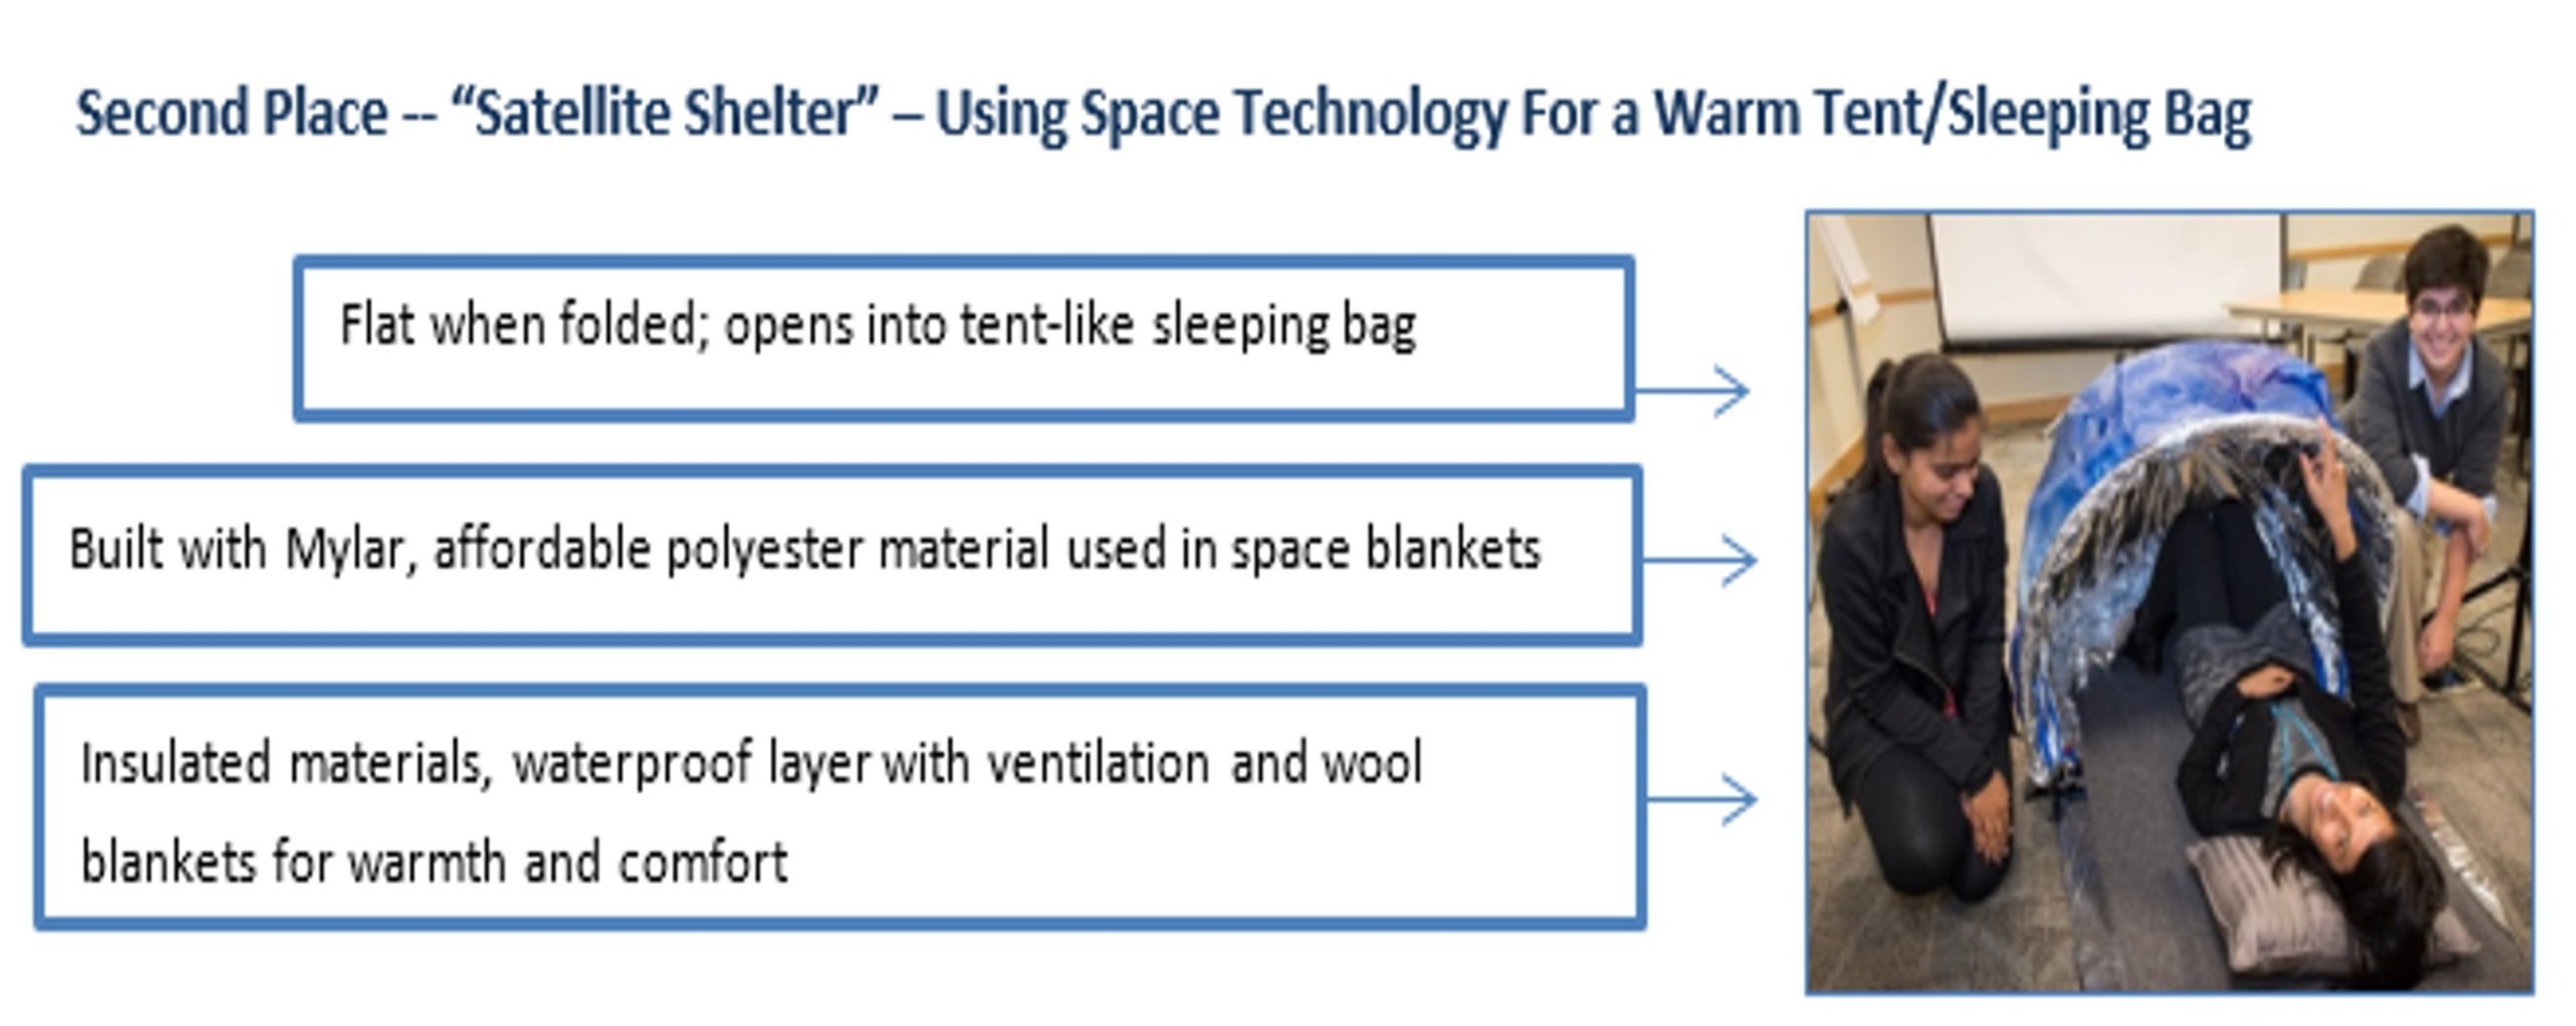 Second Place: "Satellite Shelter" - Using Space Technology For a Warm Tent/Sleeping Bag